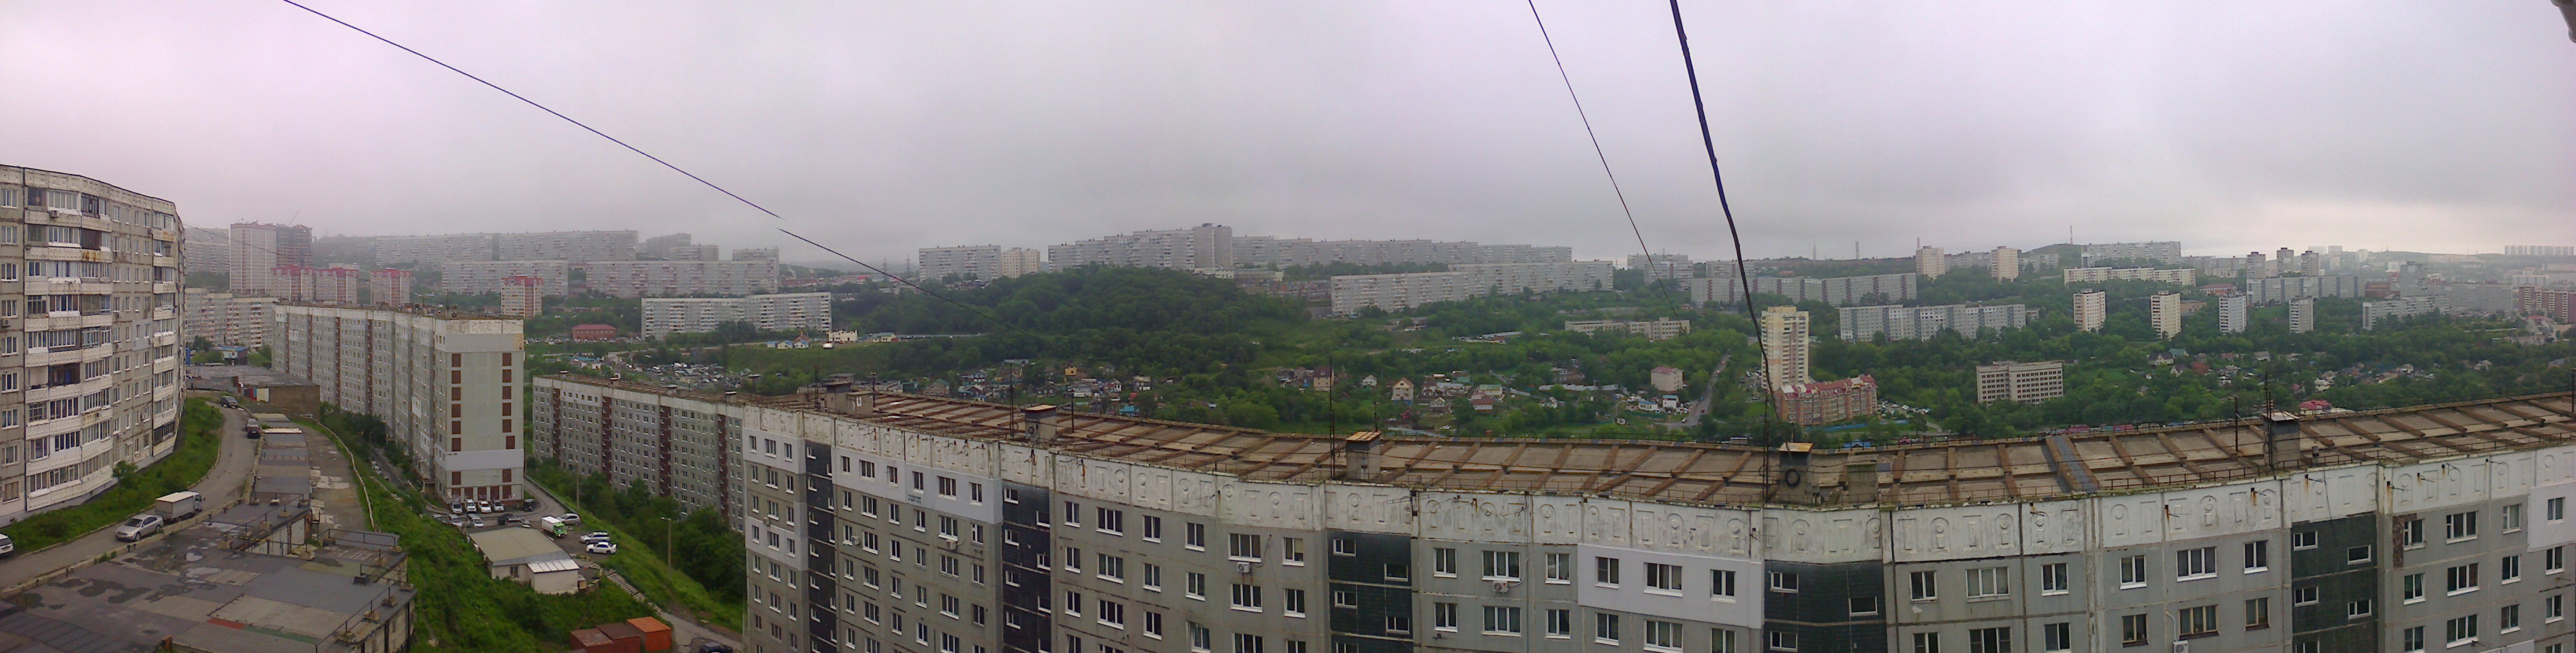 View of Vladivostok from our Airbnb apartment